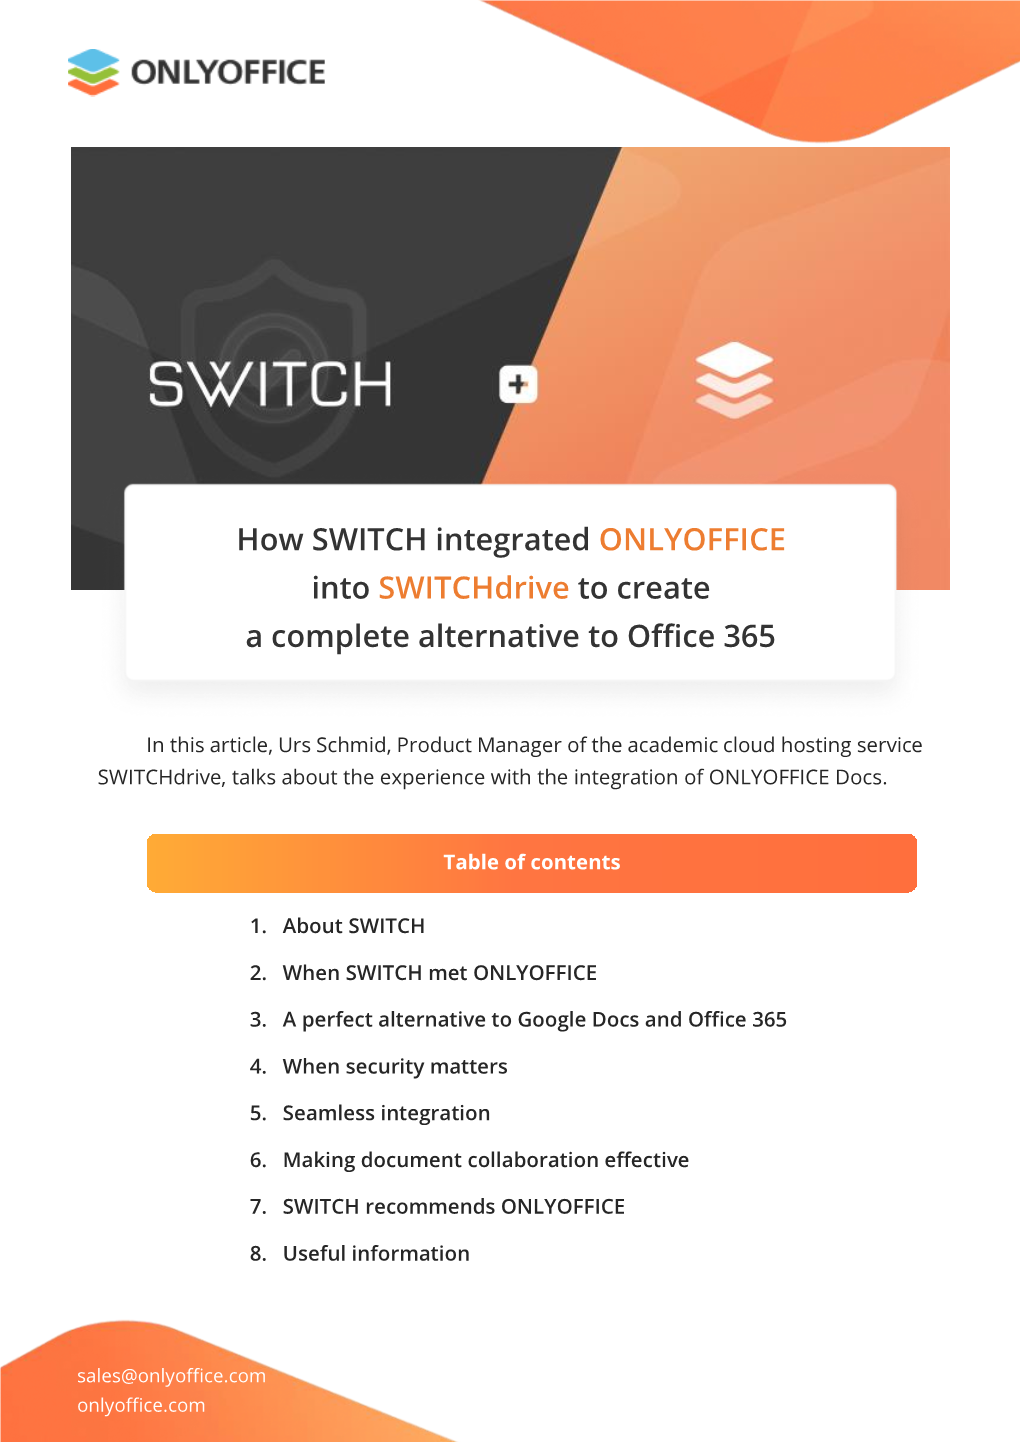 How SWITCH Integrated ONLYOFFICE Into Switchdrive to Create a Complete Alternative to Office 365